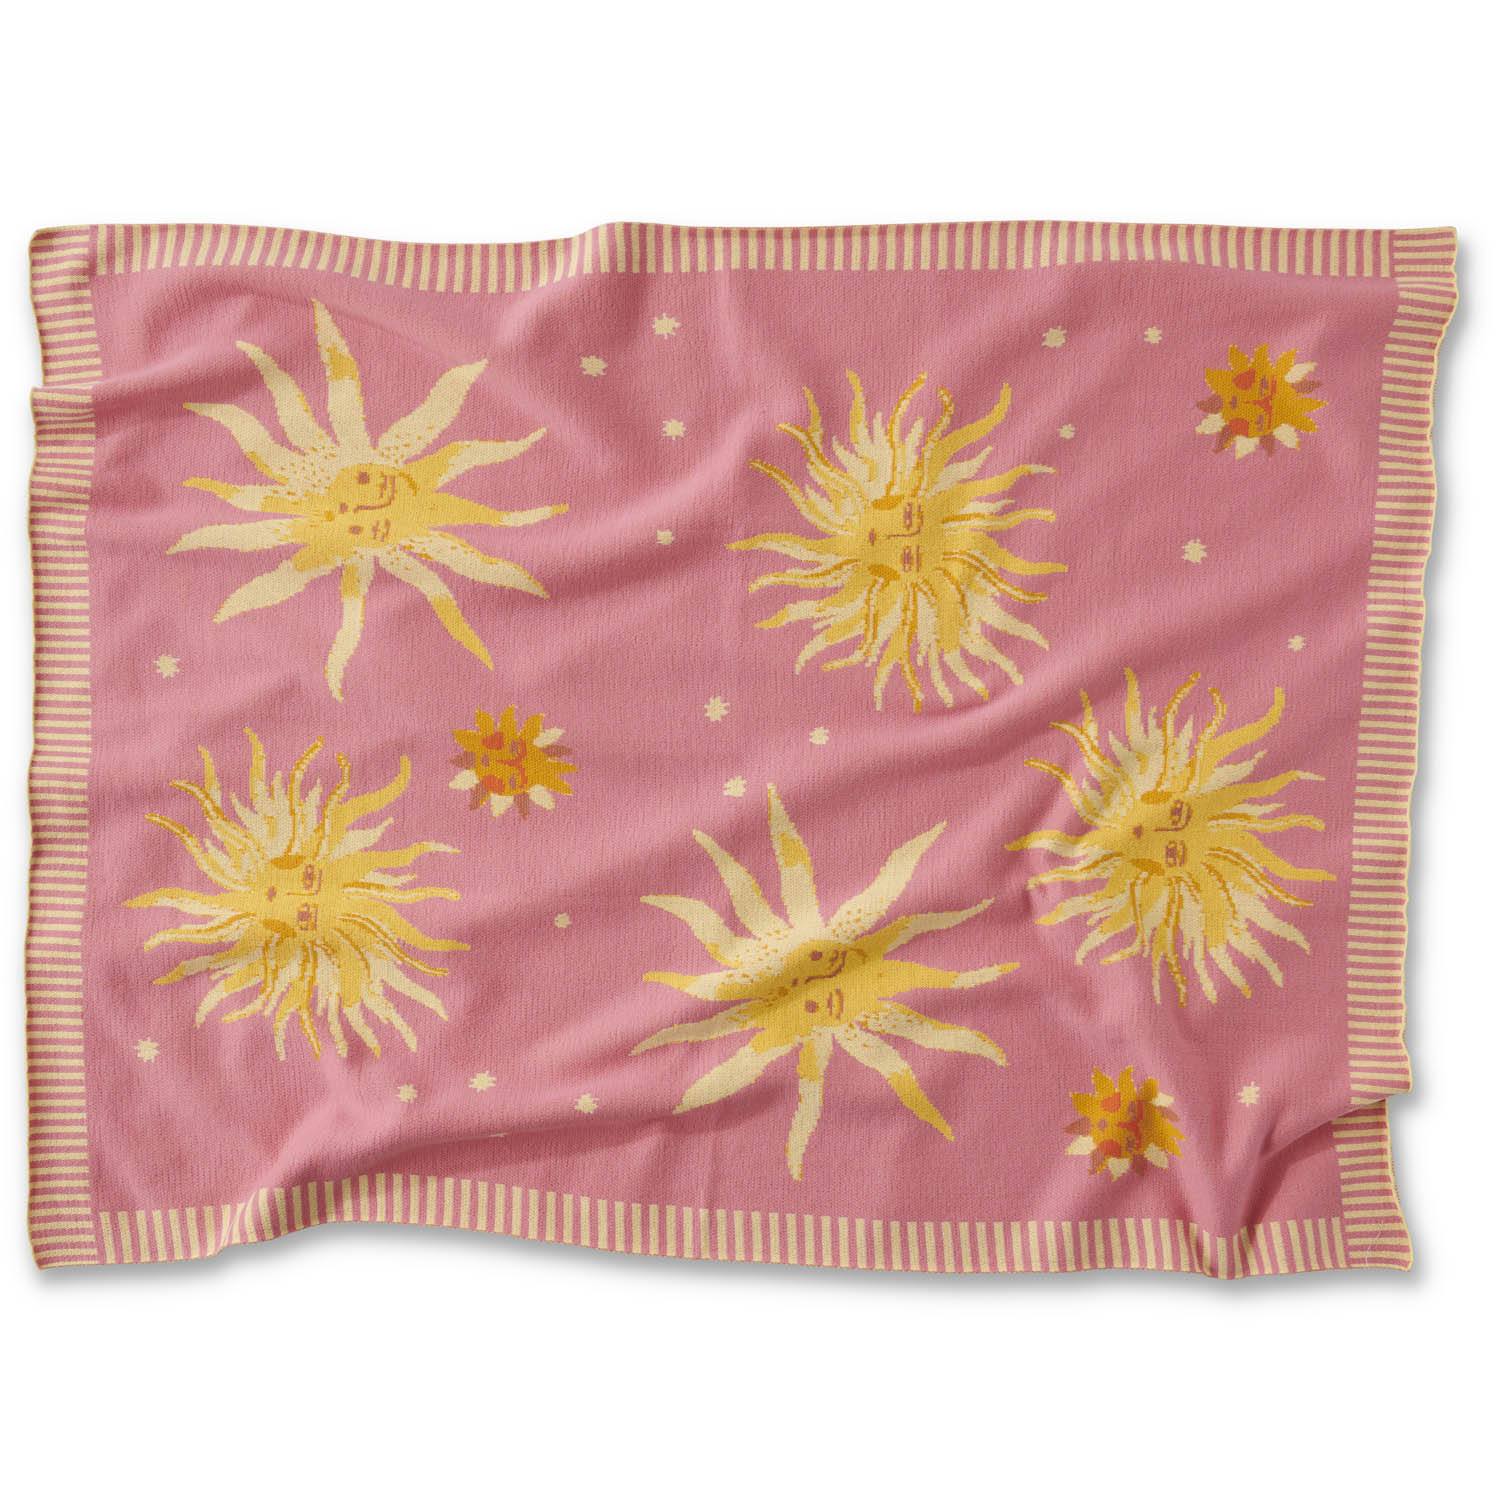 New Baby Gifts Delivered | Kip and Co Little Ray of Sunshine Blanket